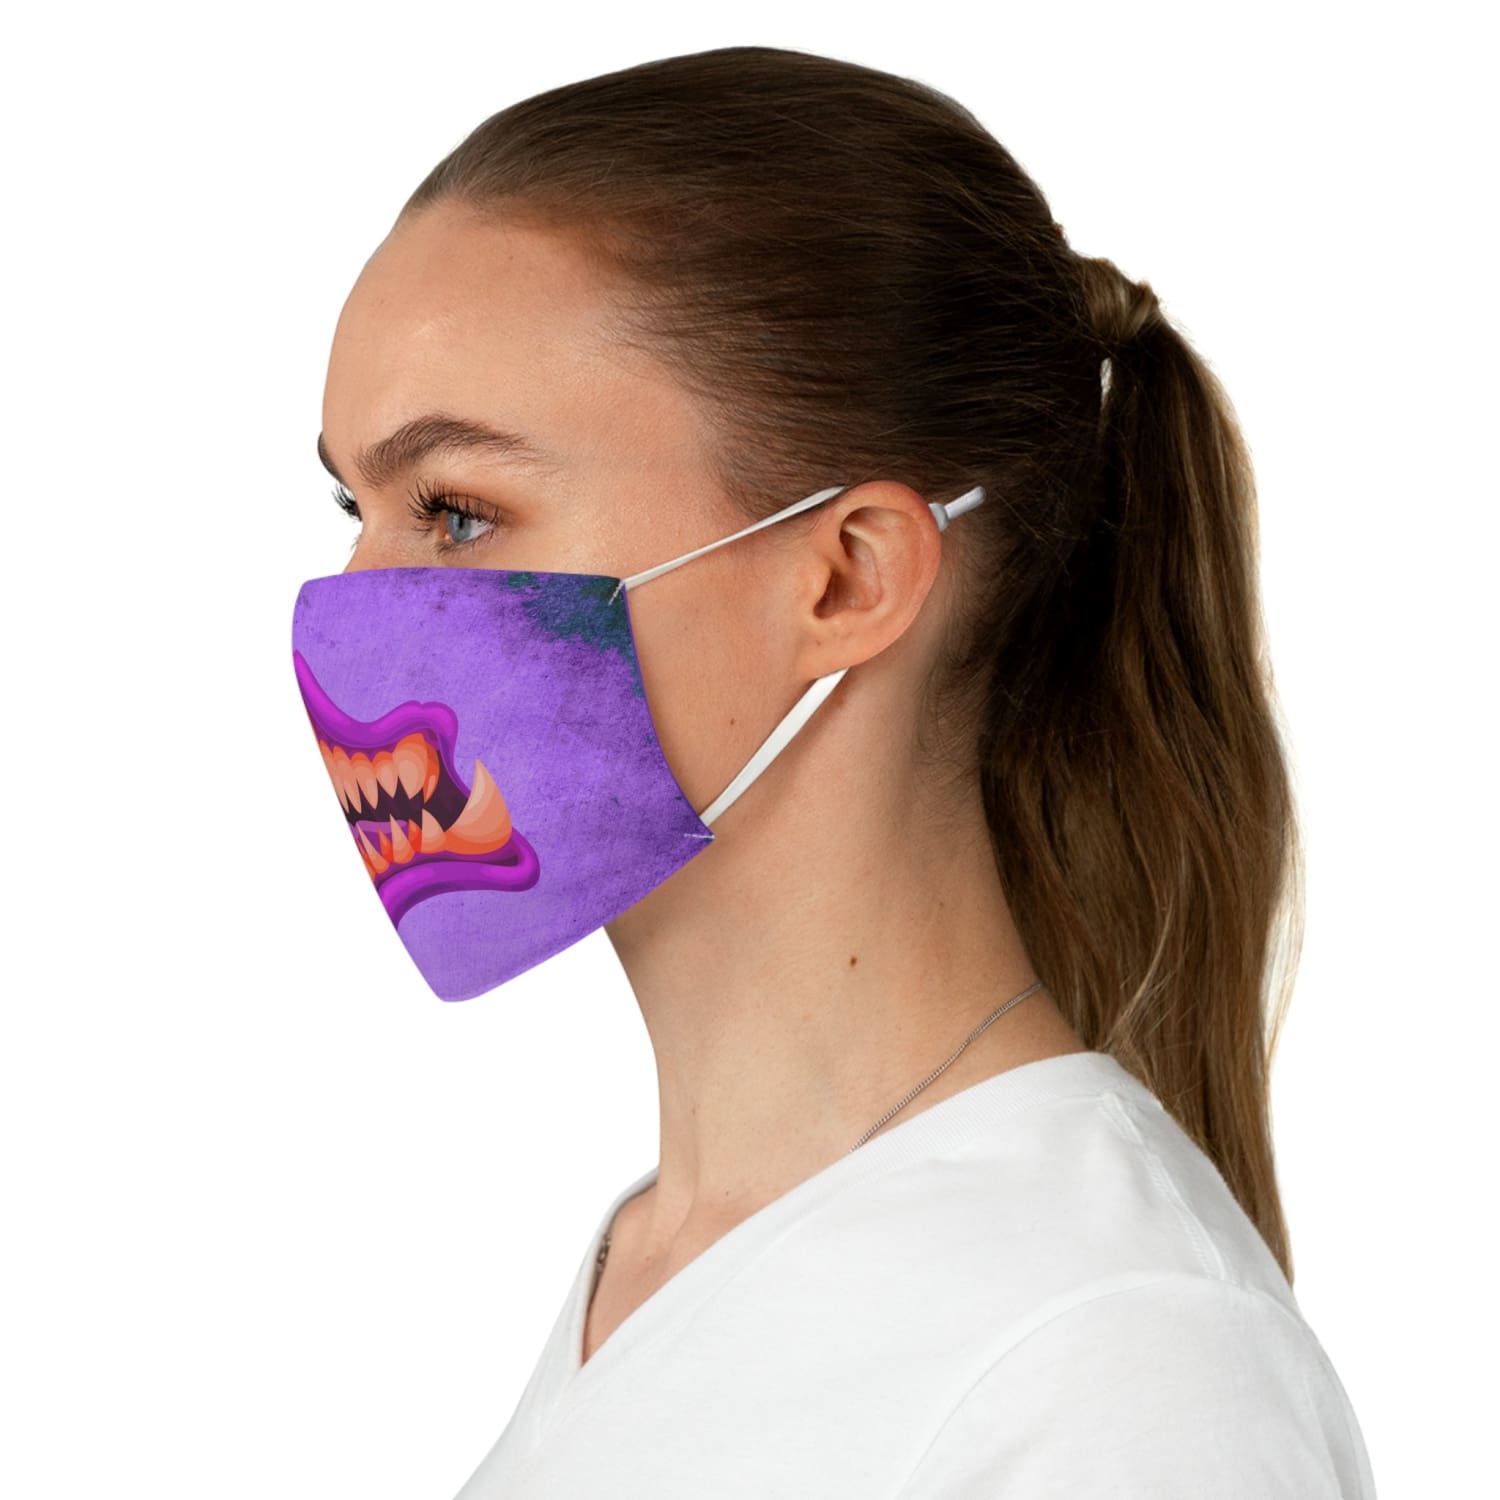 Pink Monster Mouth Fabric Face Mask - One size - Accessories